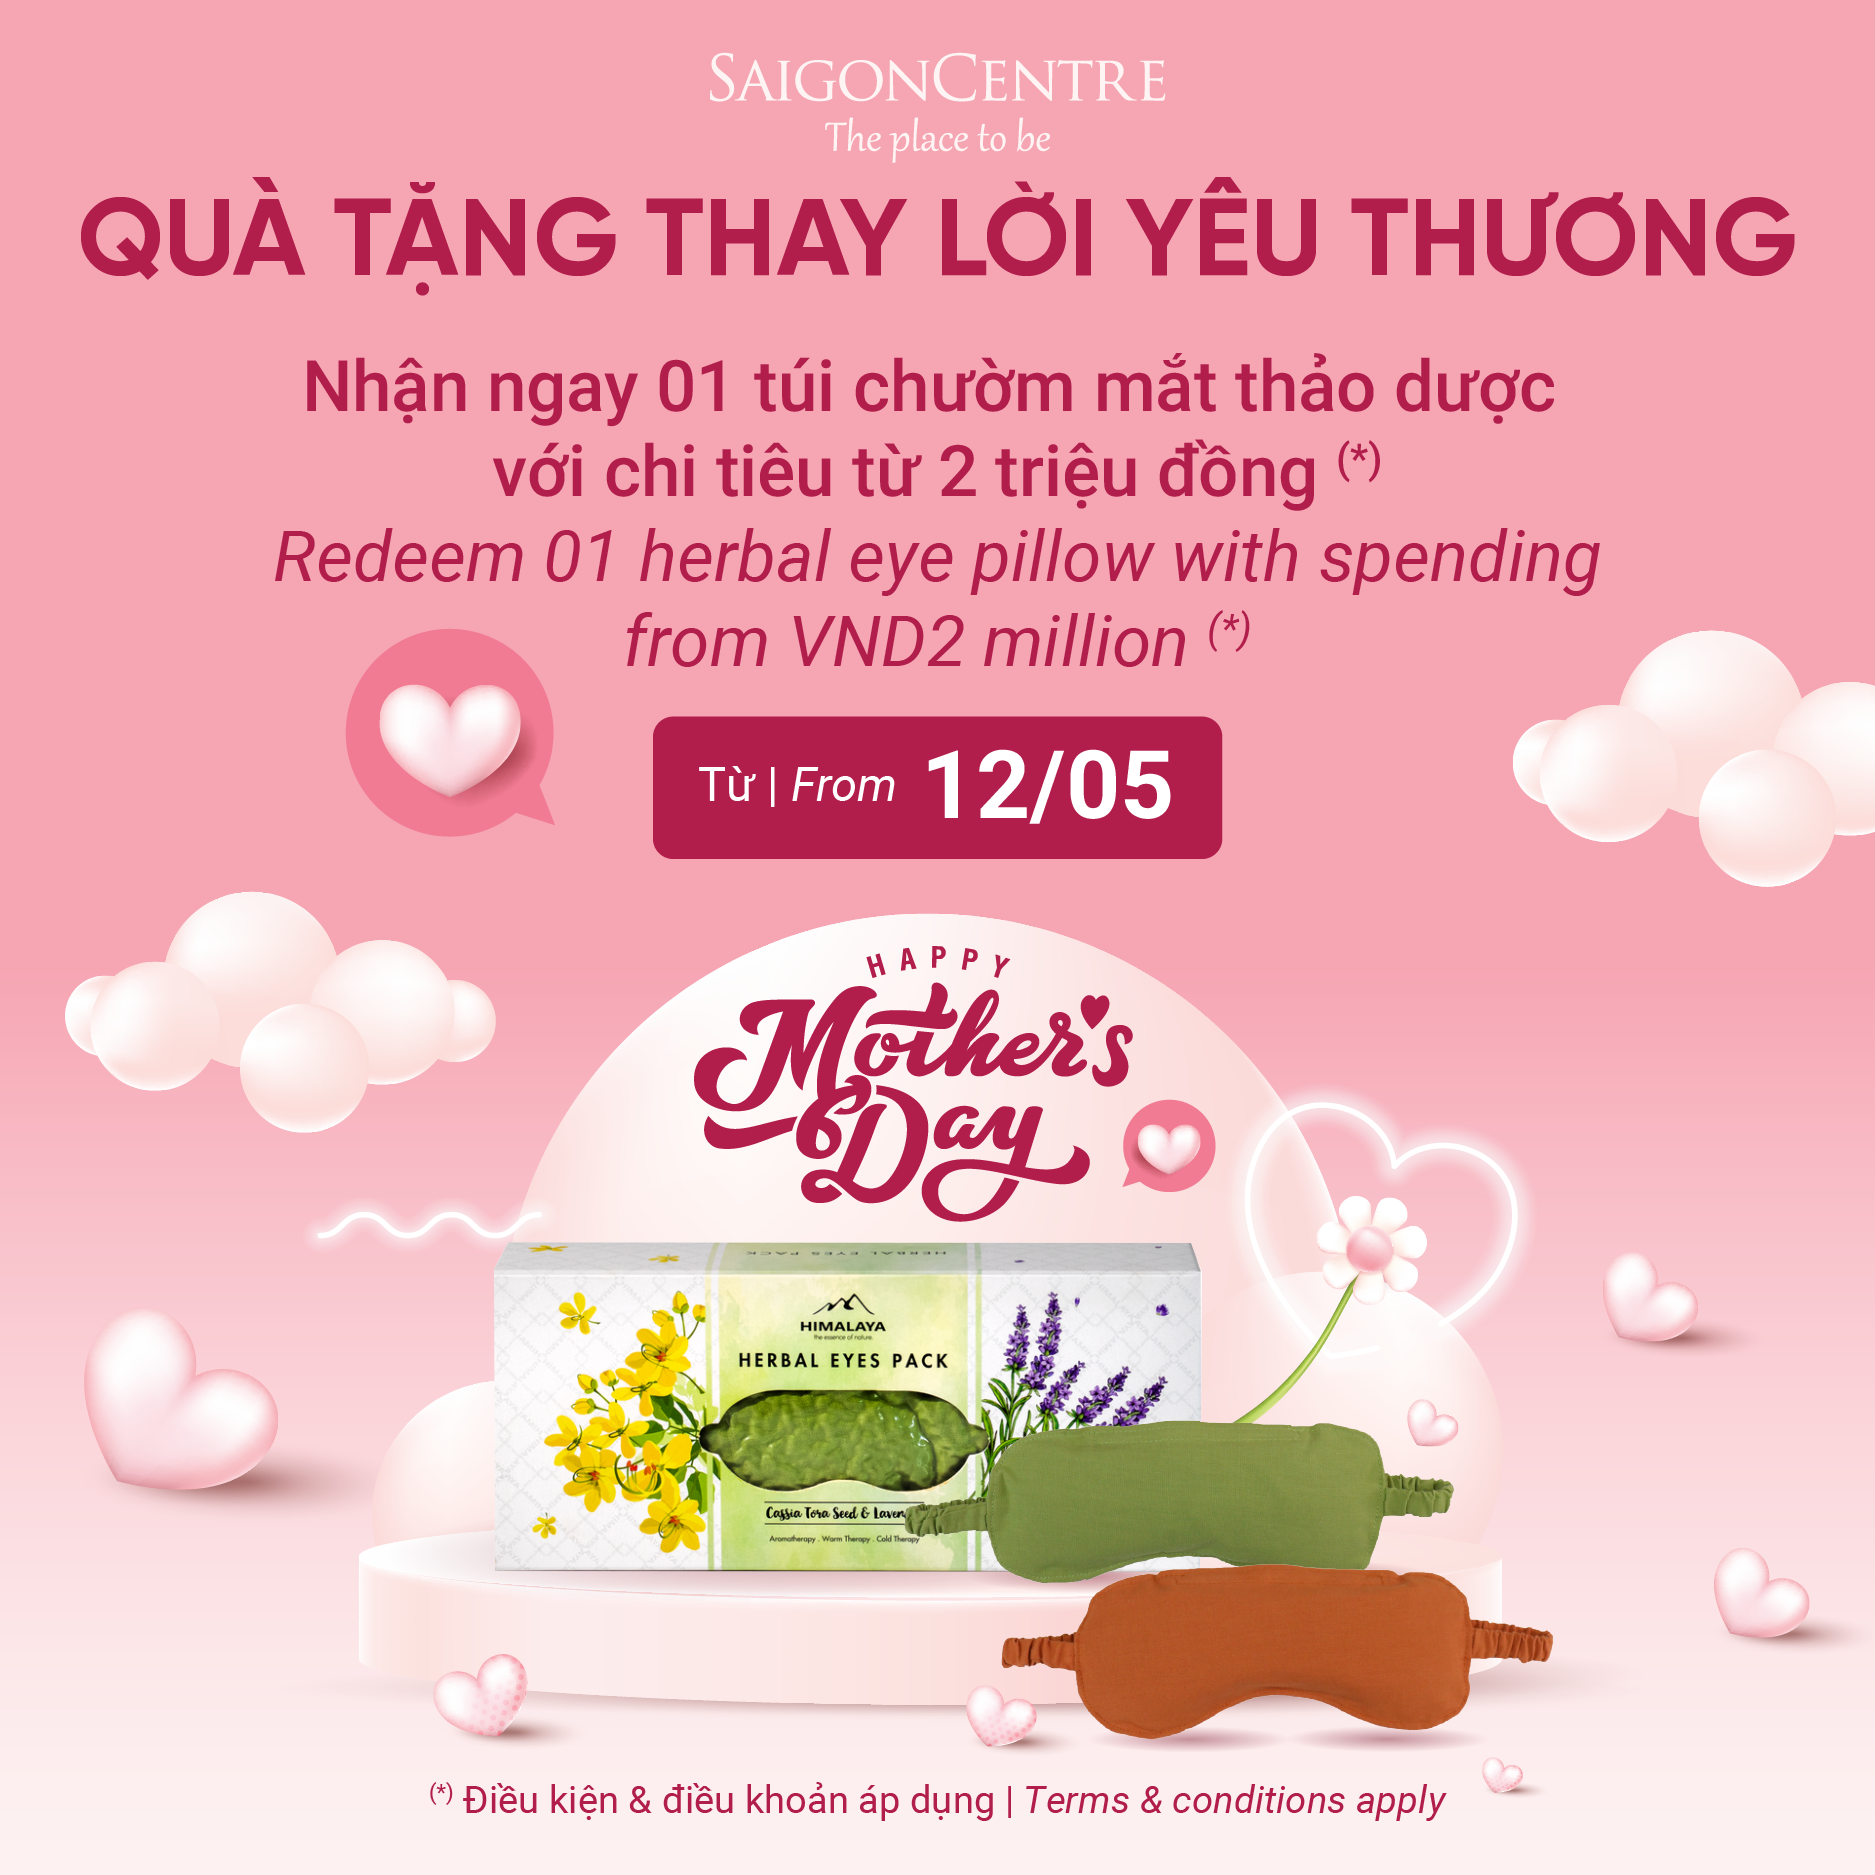 HAPPY MOTHER'S DAY PROMOTION